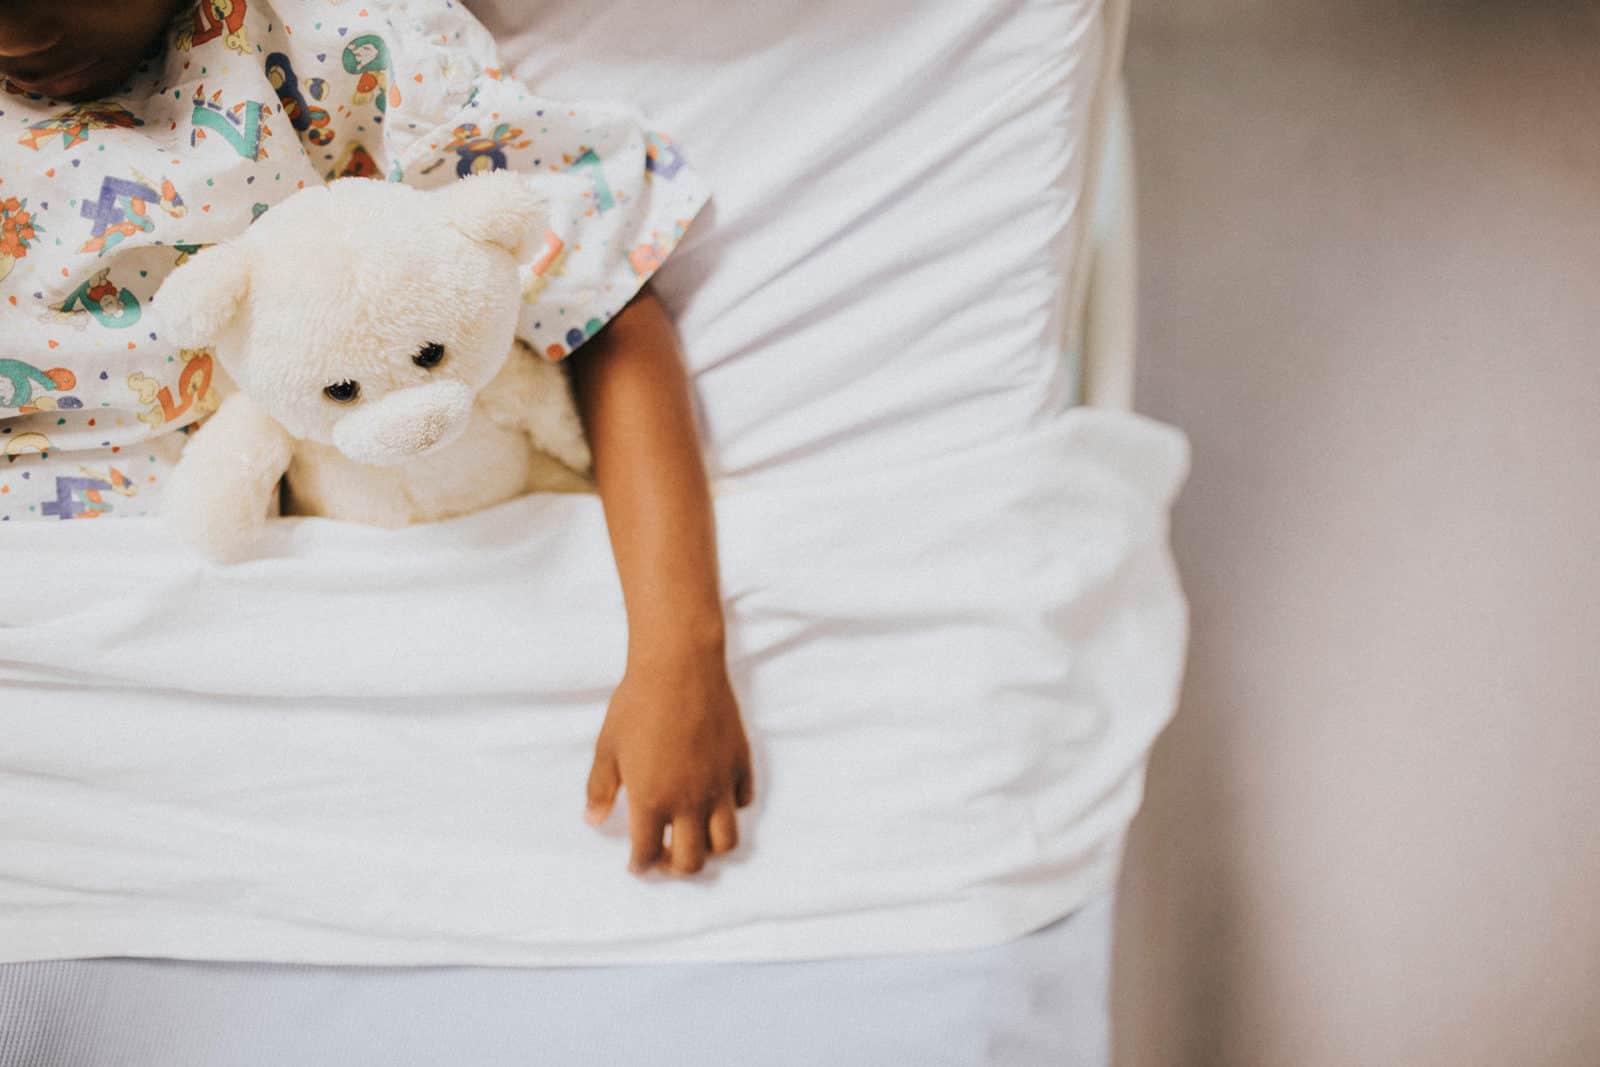 Little-girl-sleeping-in-a-hospital-bed-web-image-from-rawpixel